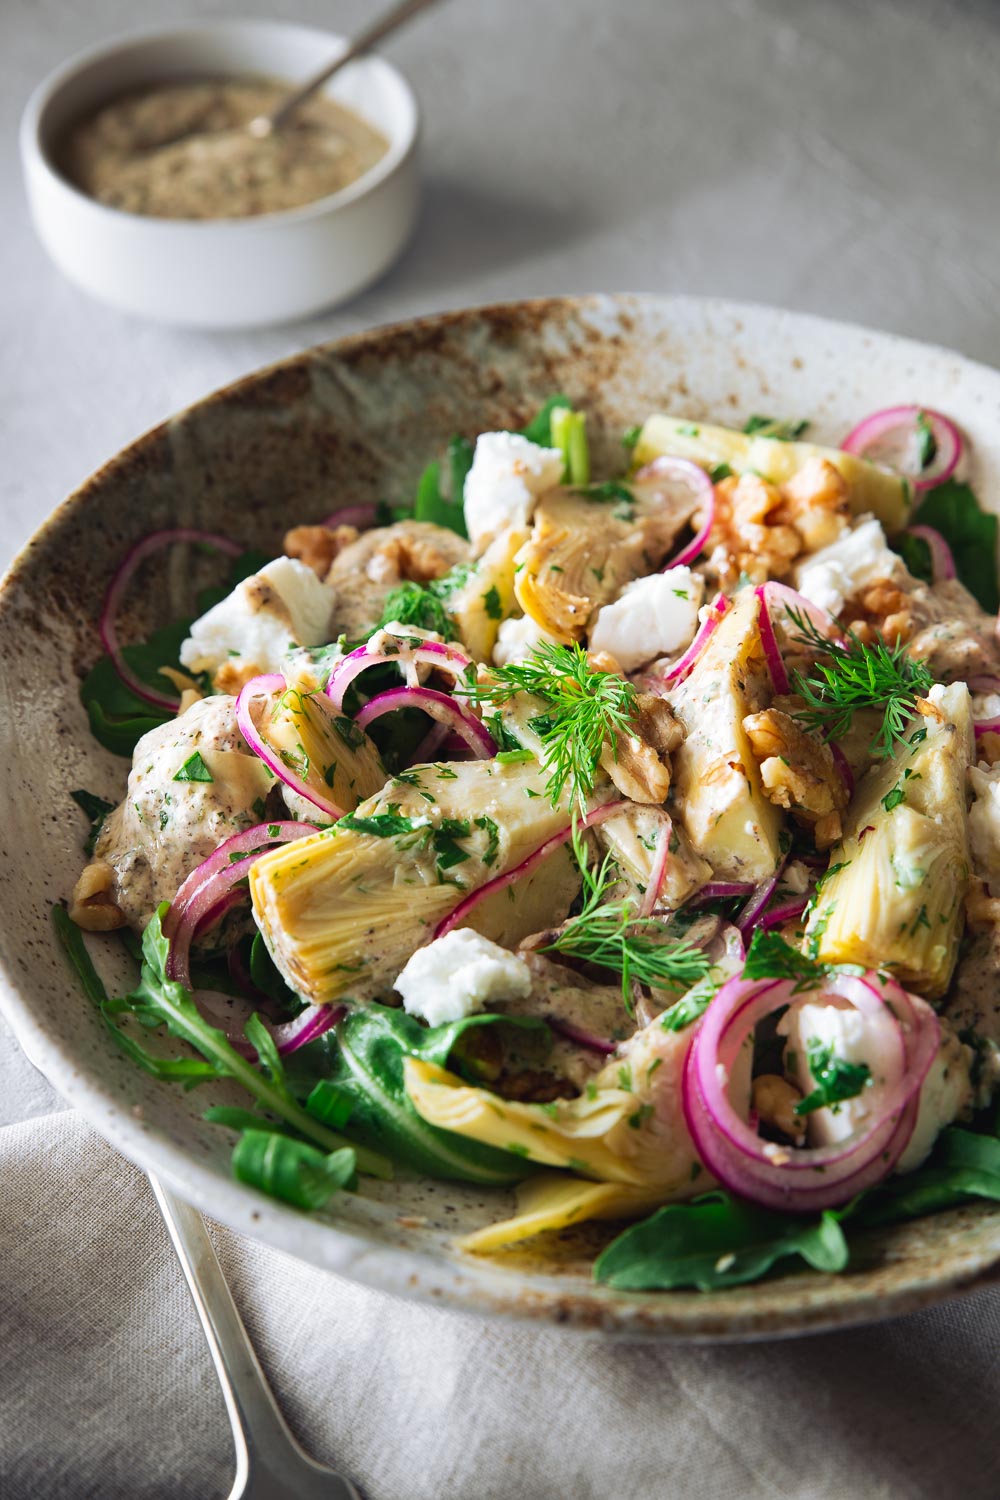 Artichoke Salad with Goat’s Cheese & Lime Yoghurt